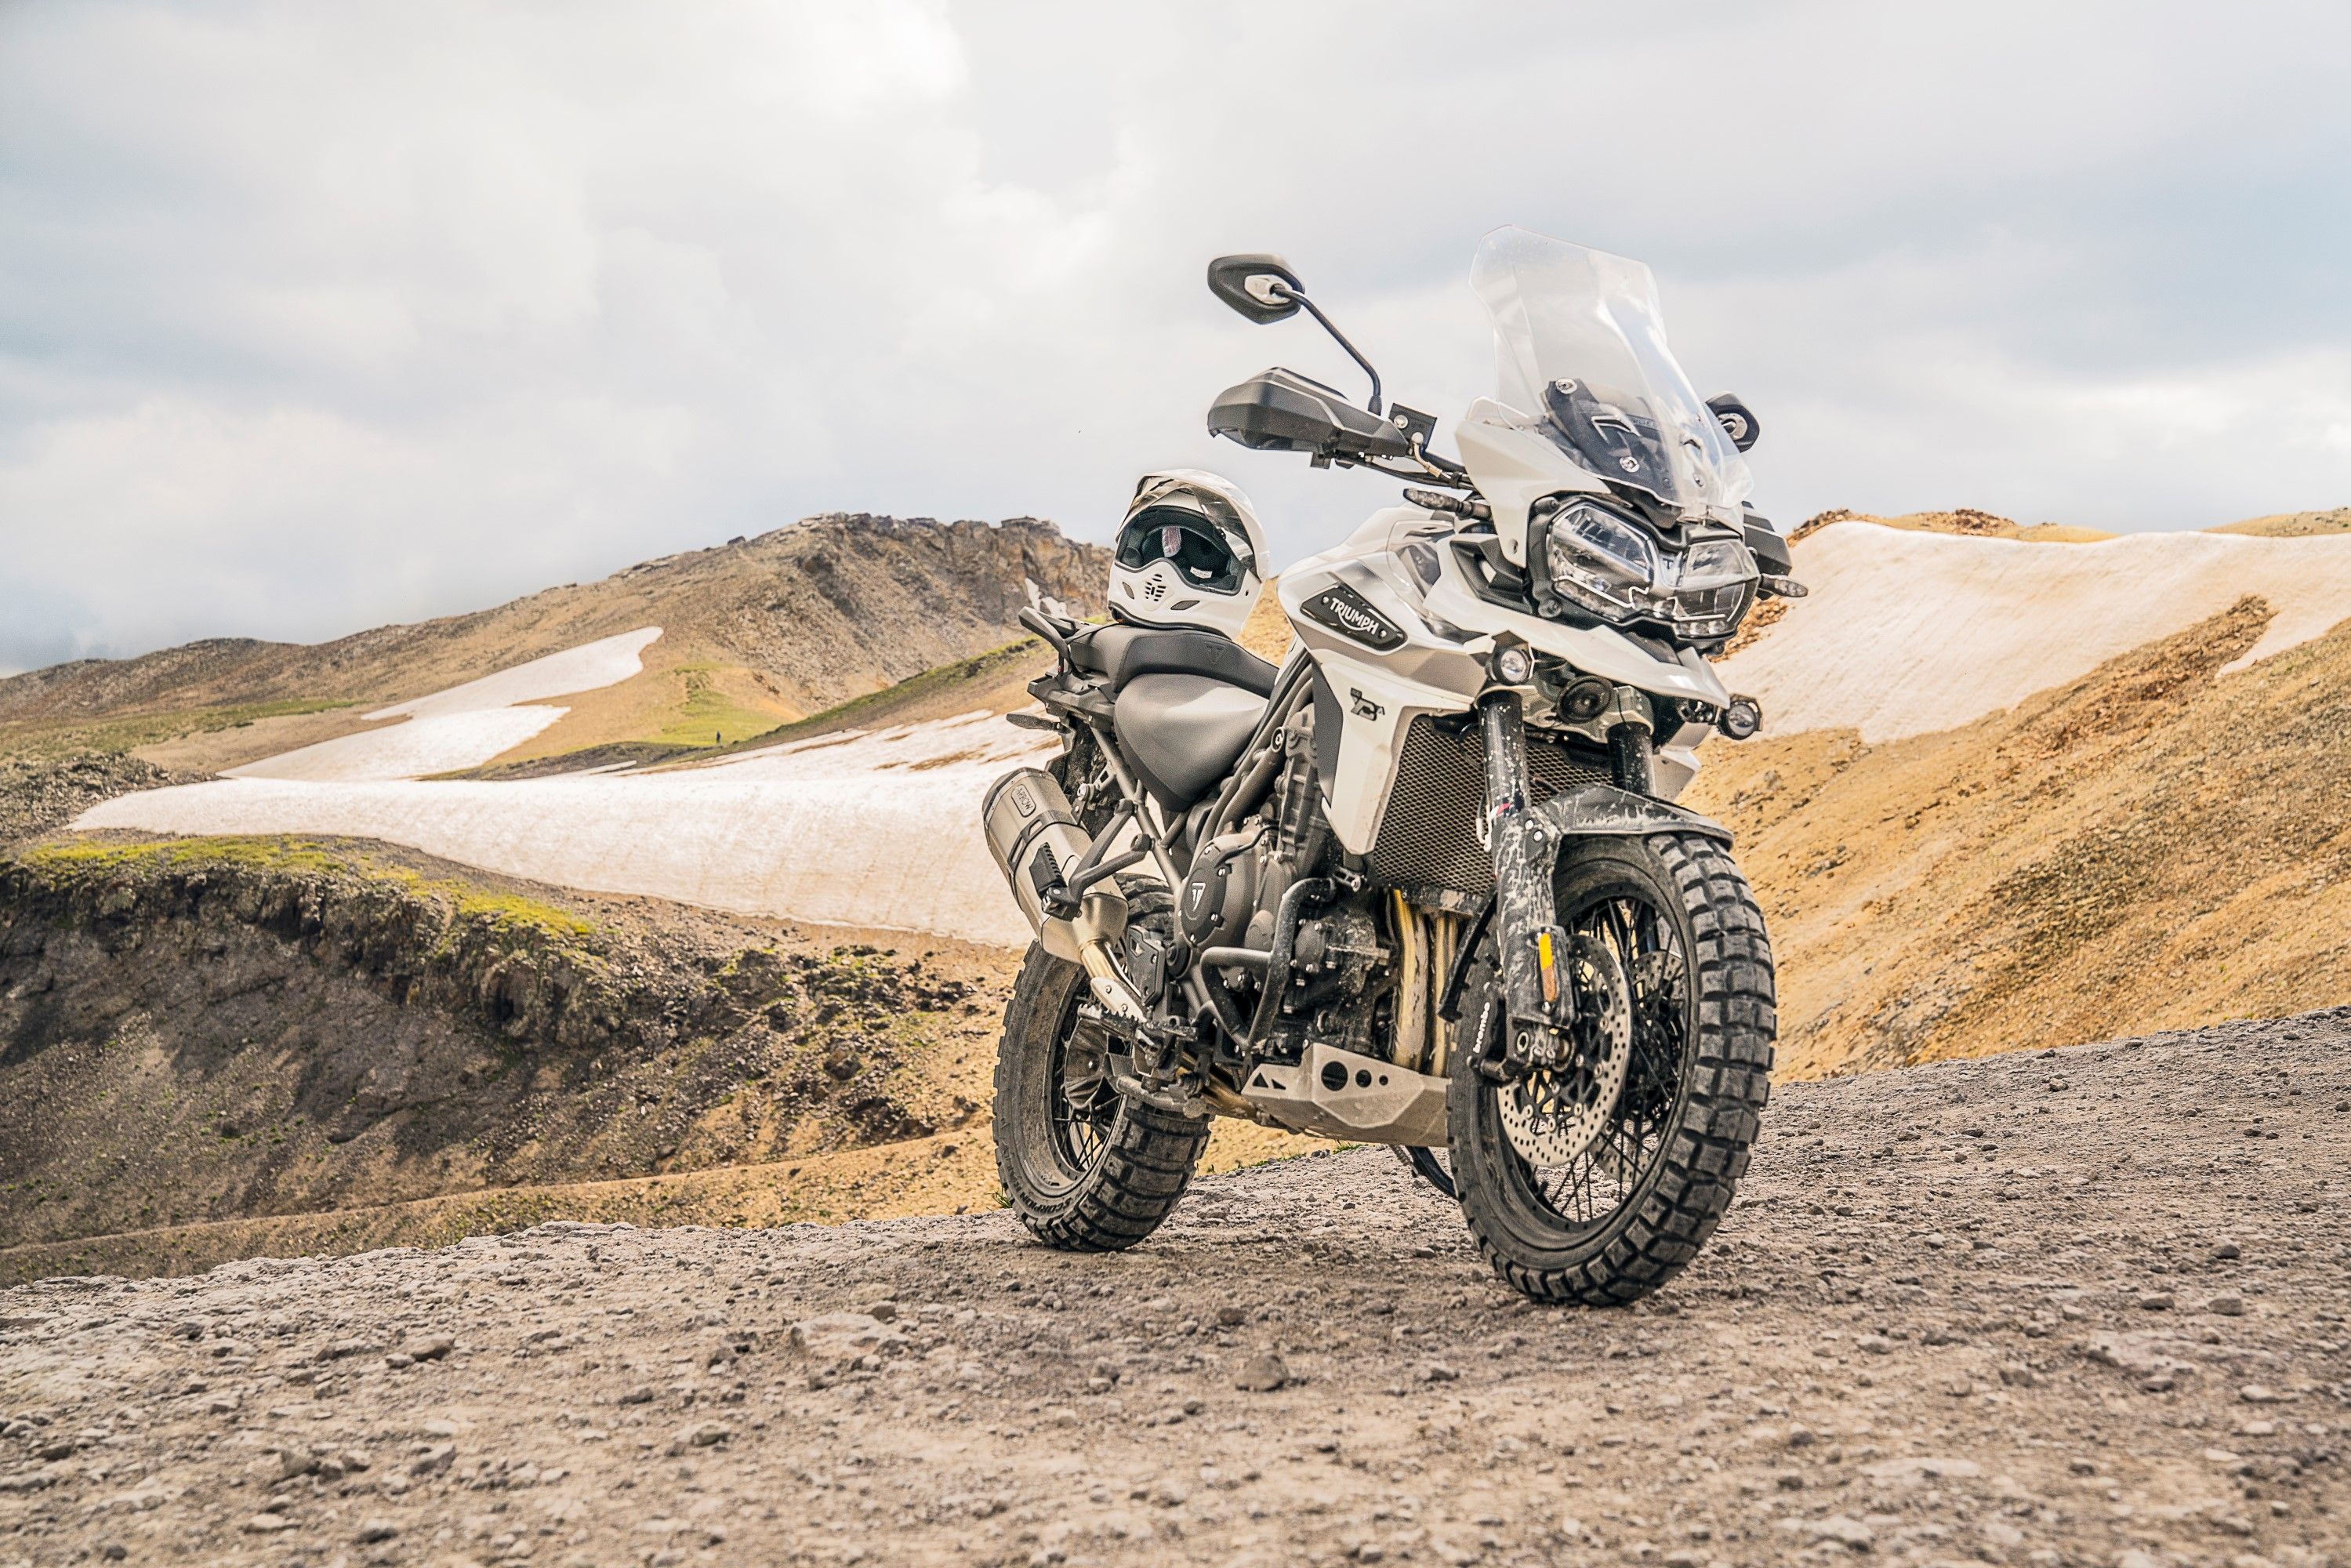 Gallery: 2018 Triumph Tiger 1200 The Details